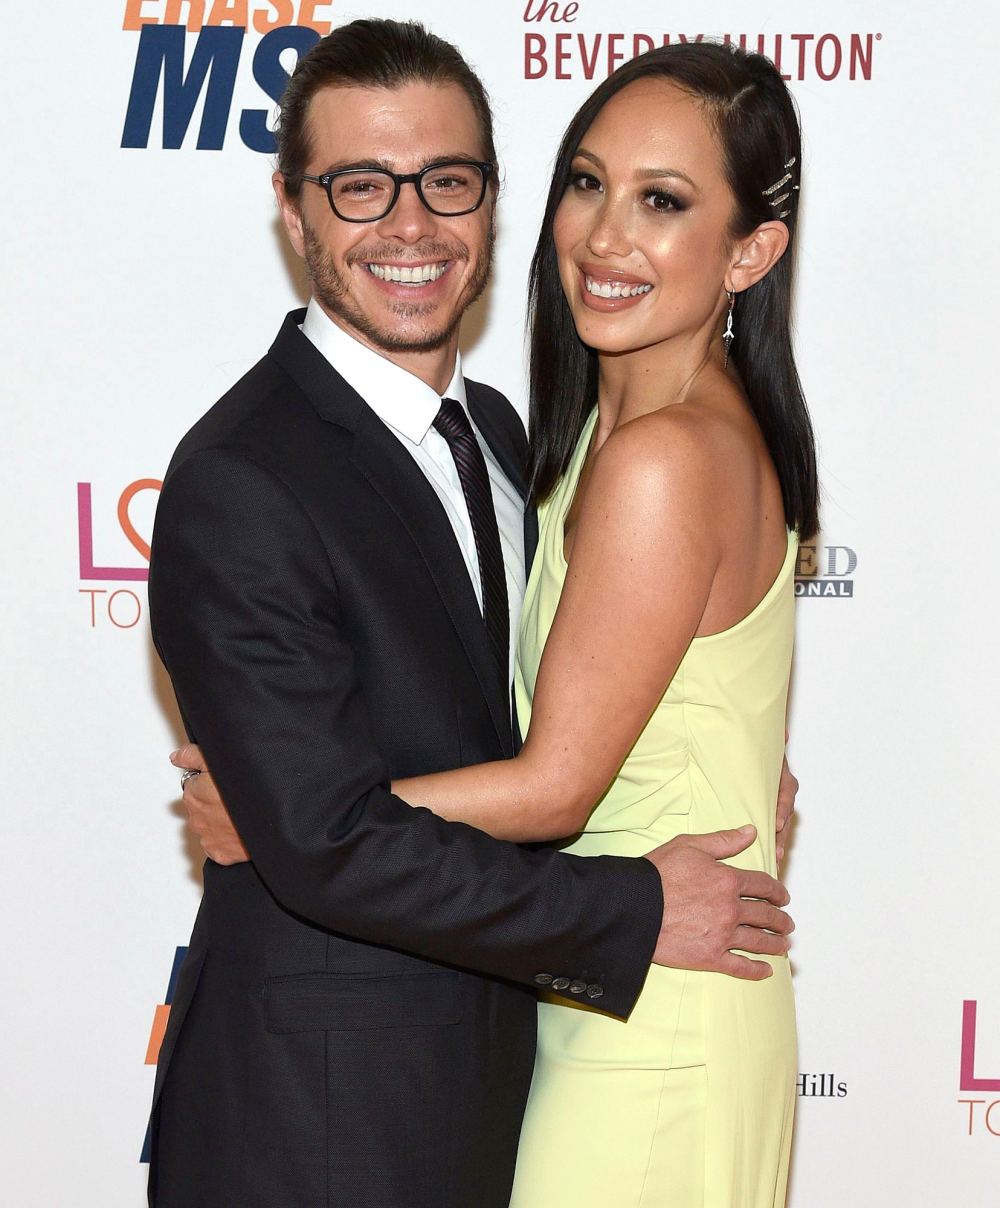 Cheryl Burke Celebrates 4 Years of Sobriety Amid Divorce From Matthew Lawrence 3